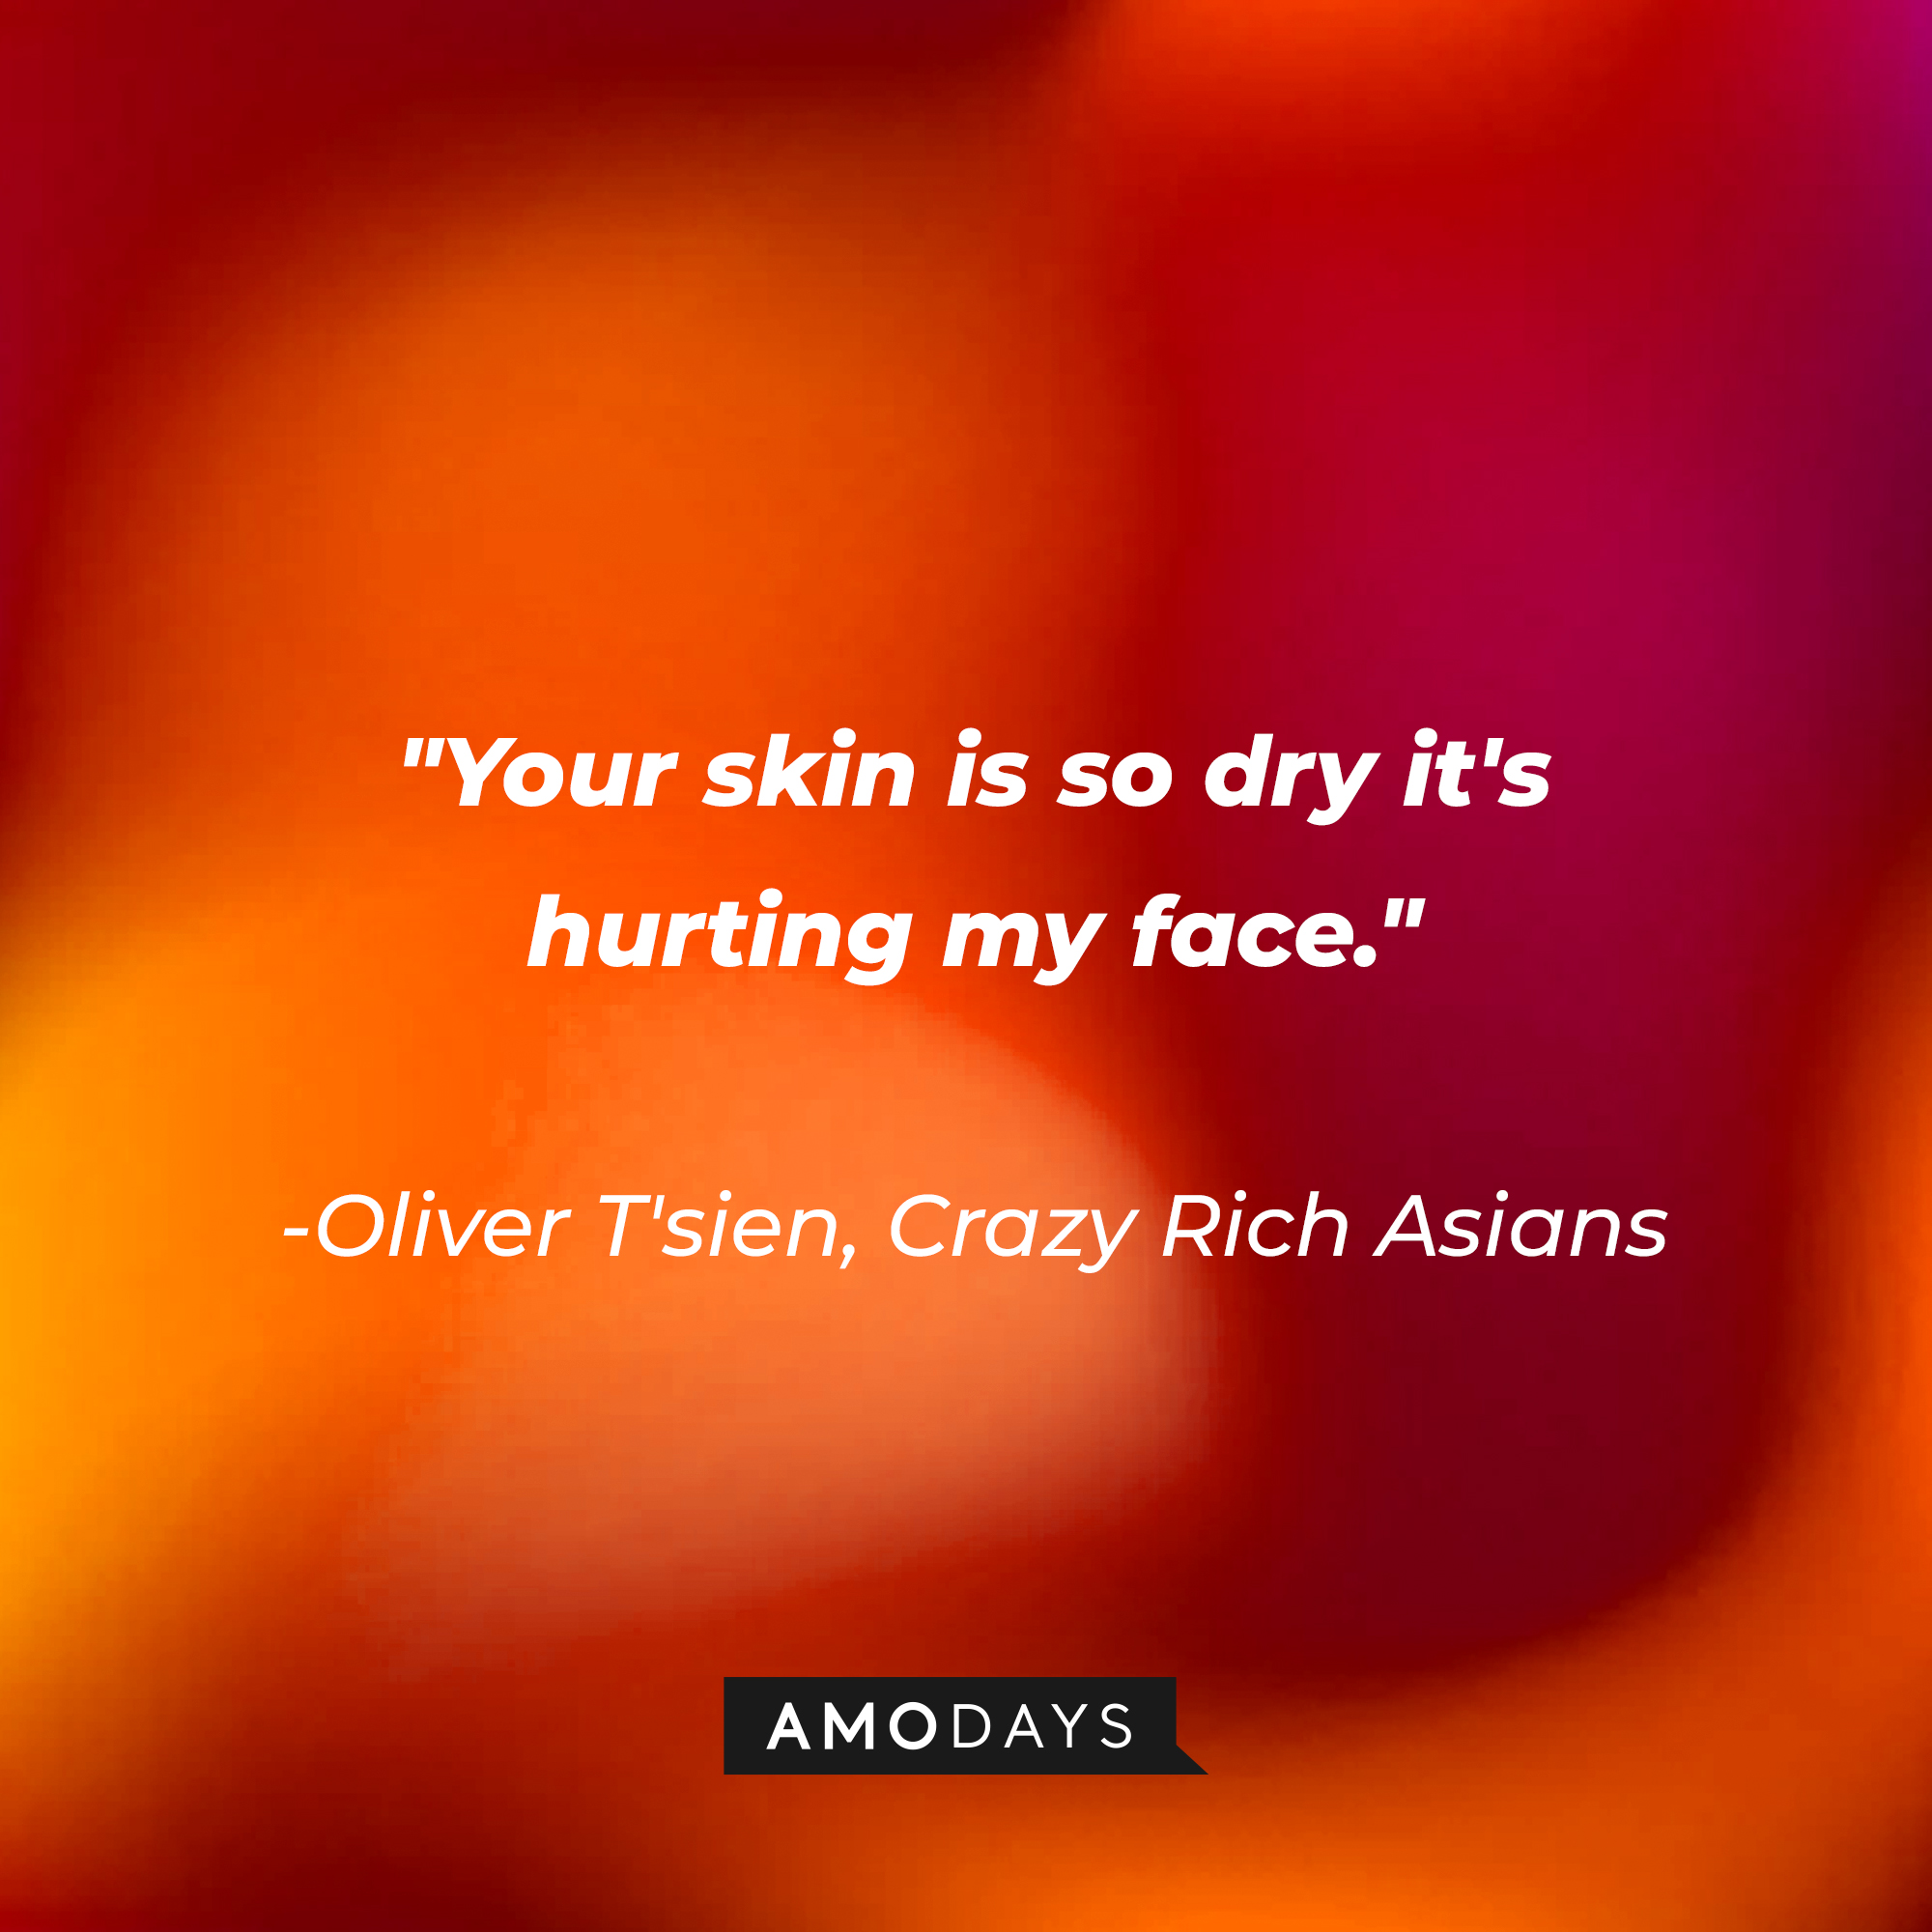 Olvier T'sien's quote: "Your skin is so dry it's hurting my face." | Source: AmoDays